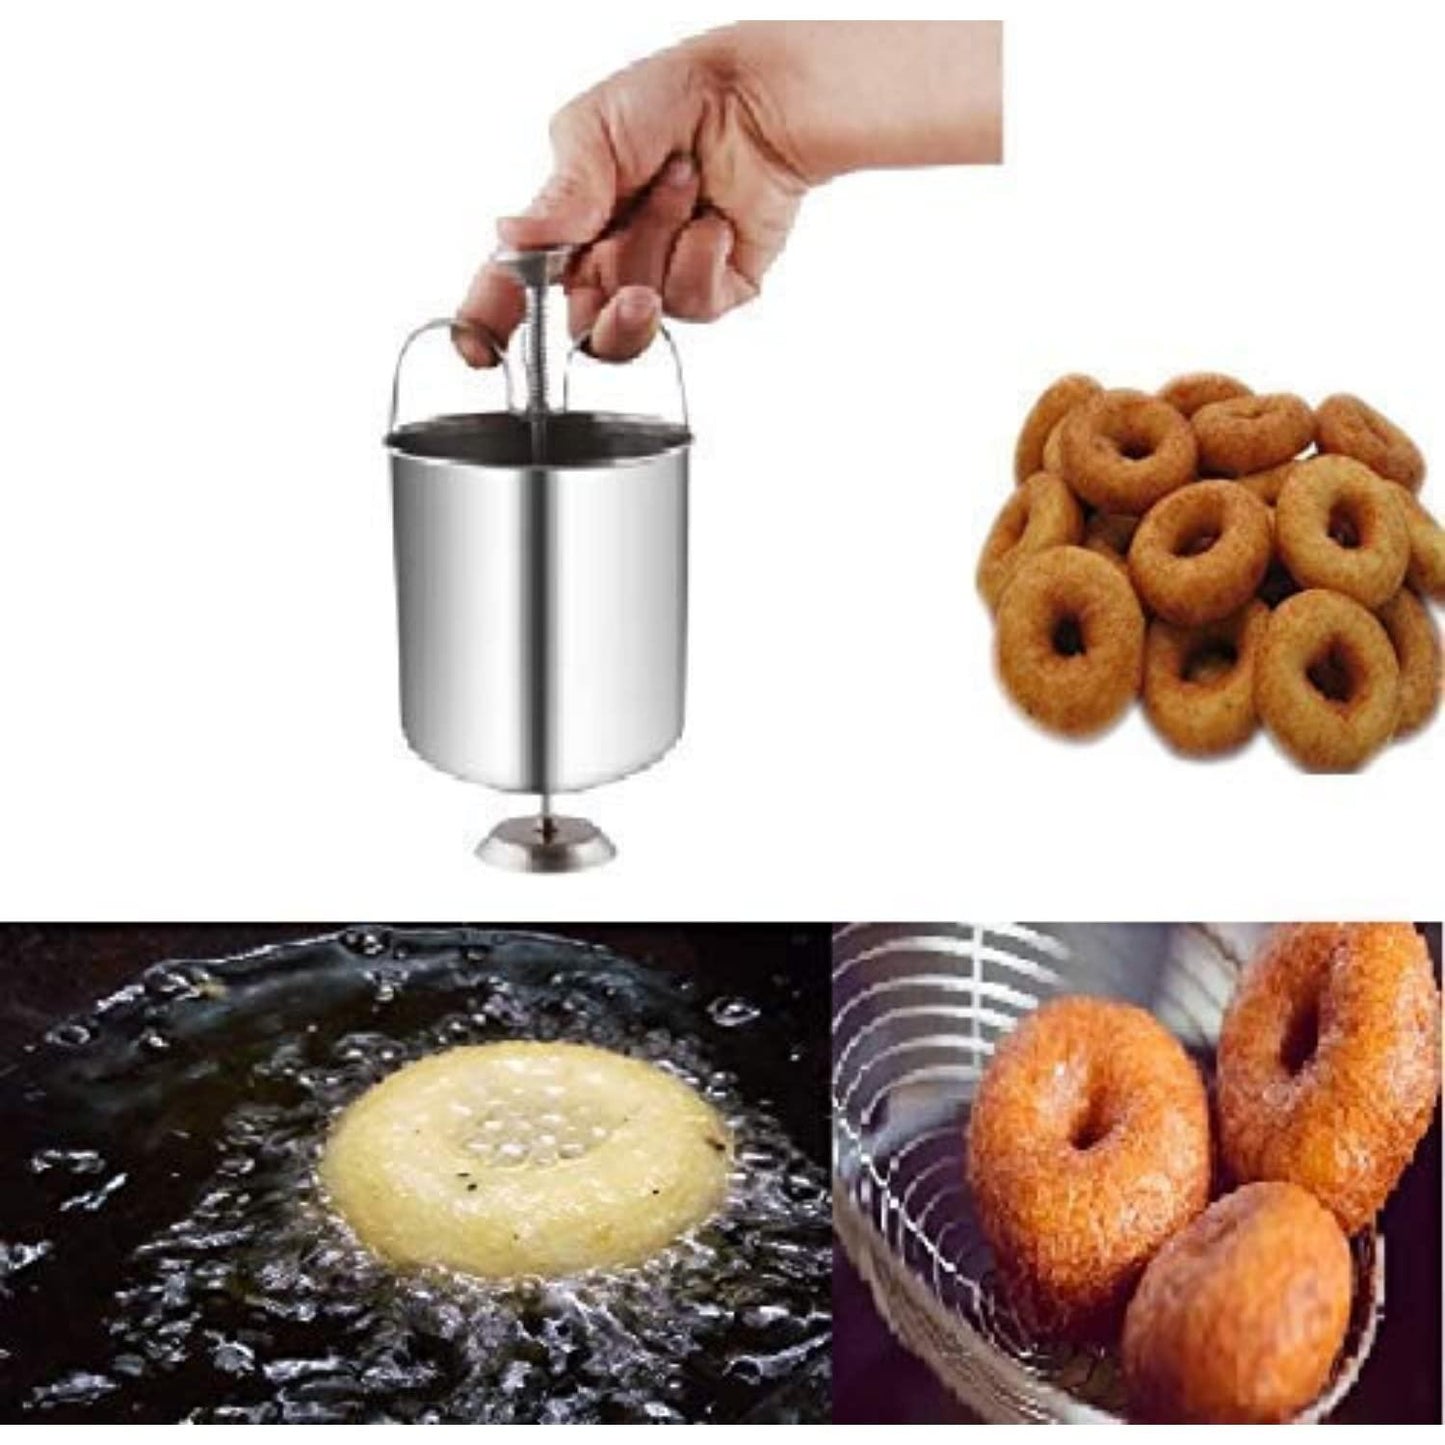 Stainless Steel Medu Vada Maker With Stand